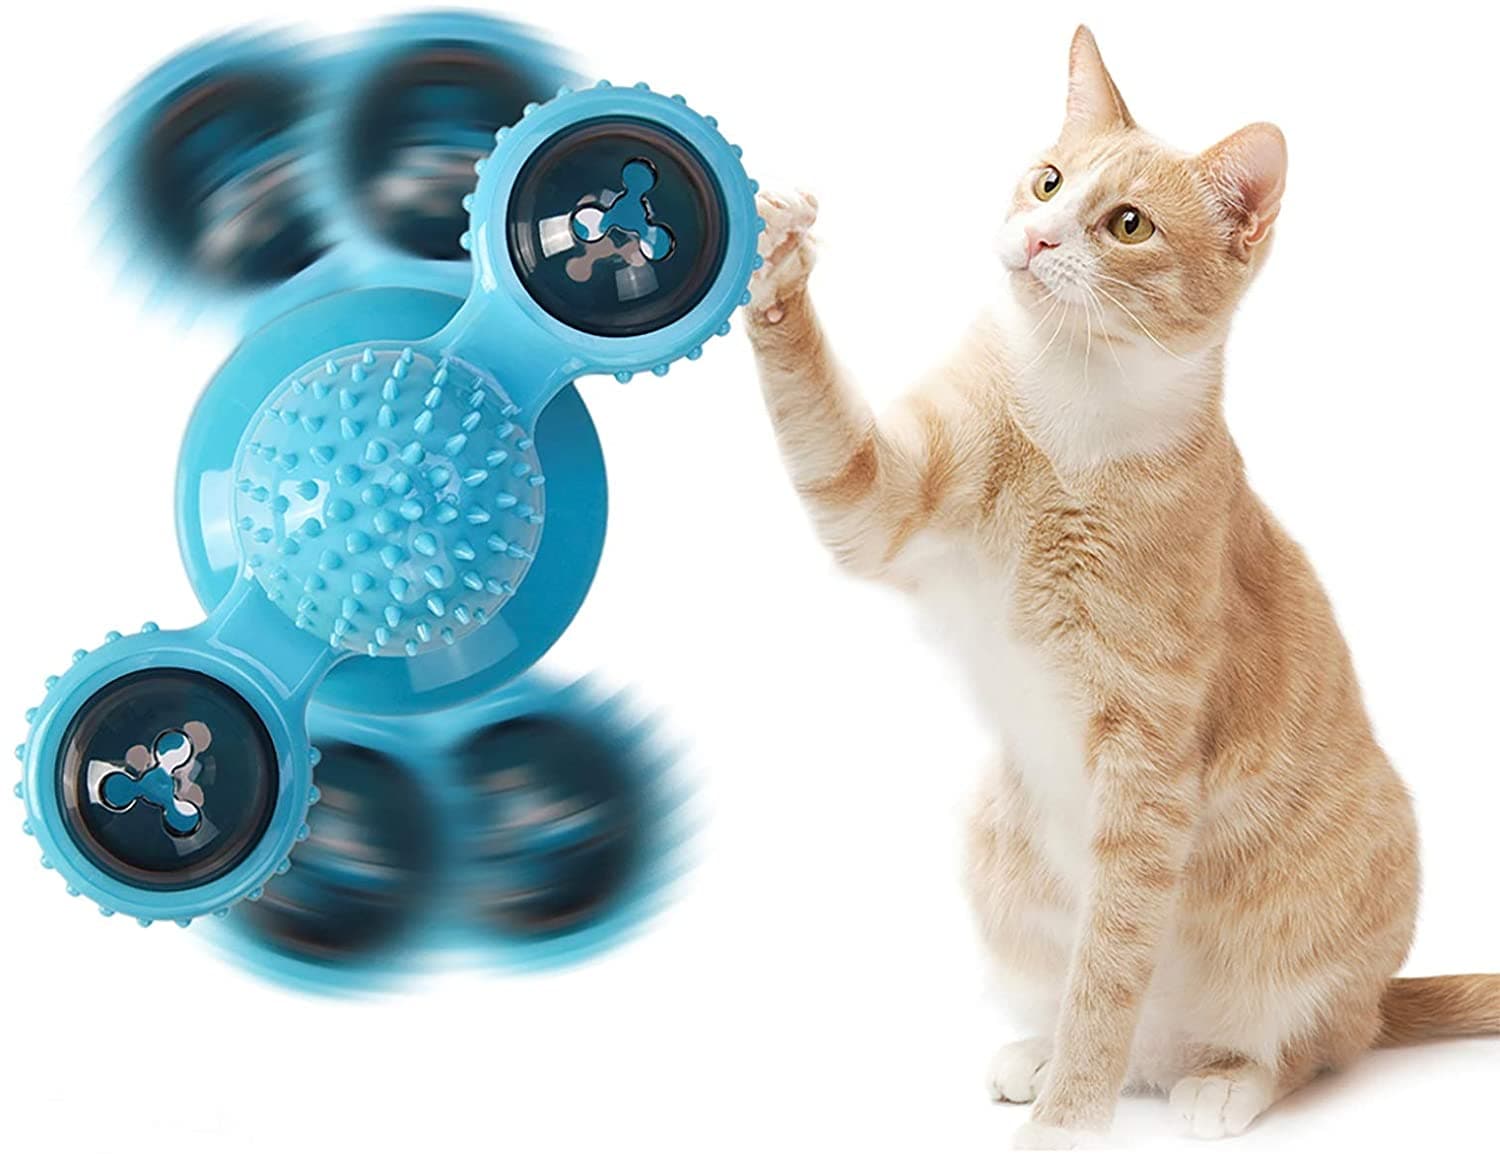 Nerf Catnip Disc Blaster Cat Toy, Small, Pack of 3